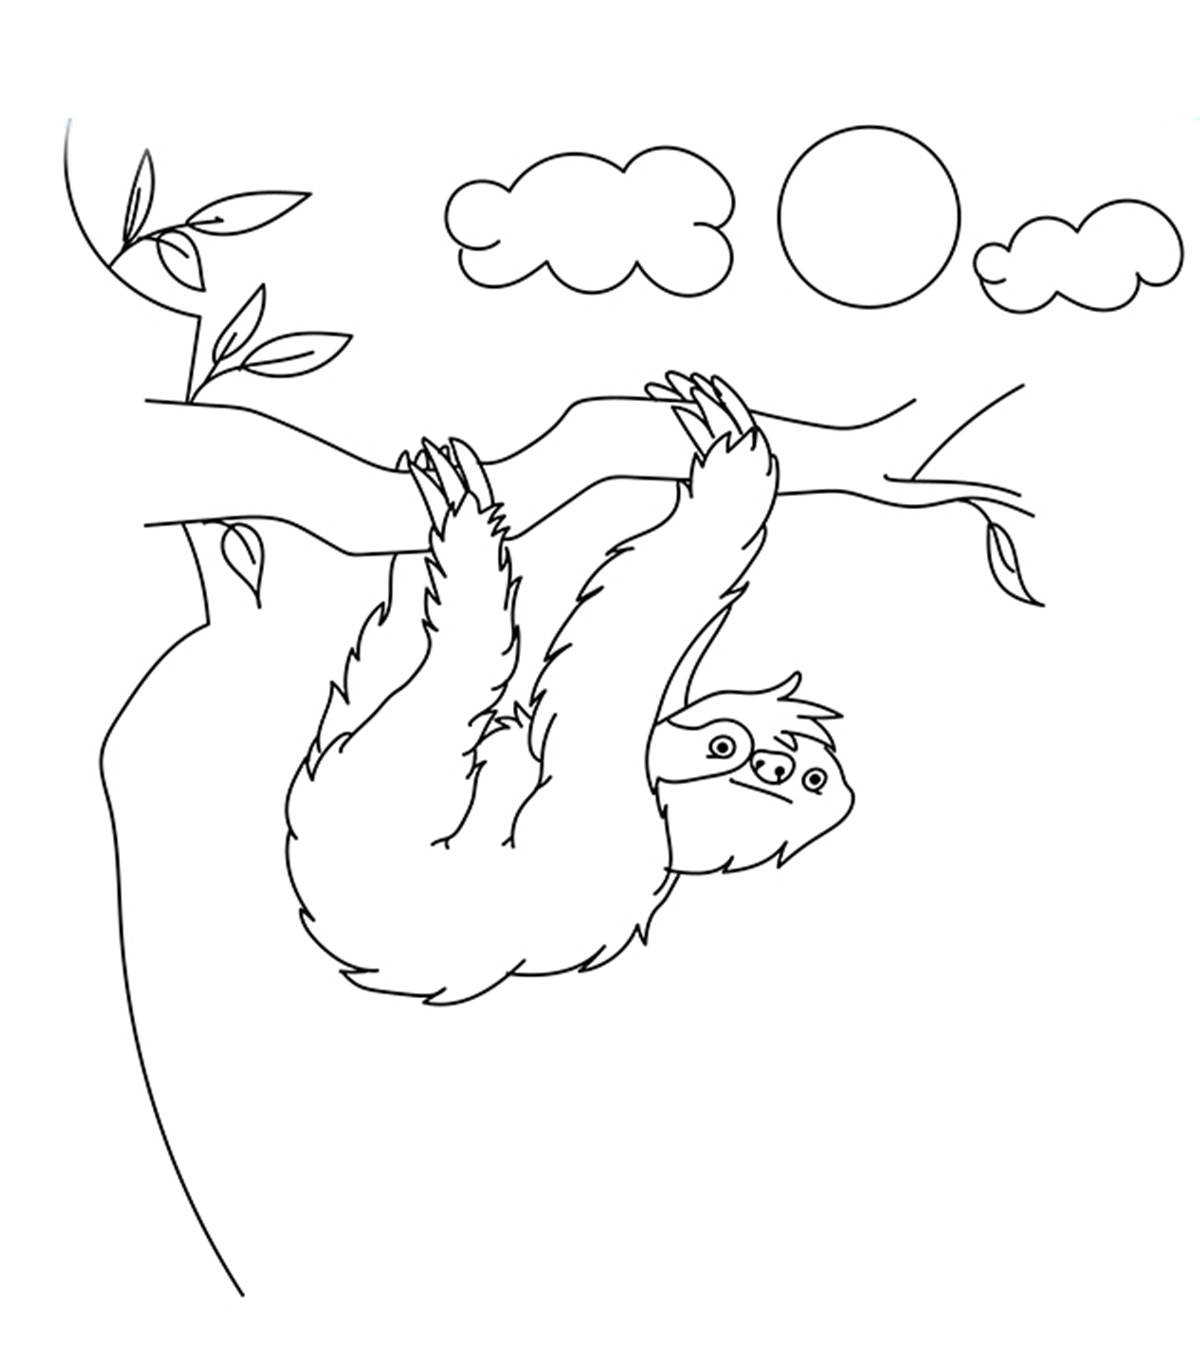 Top sloth coloring pages for your toddler